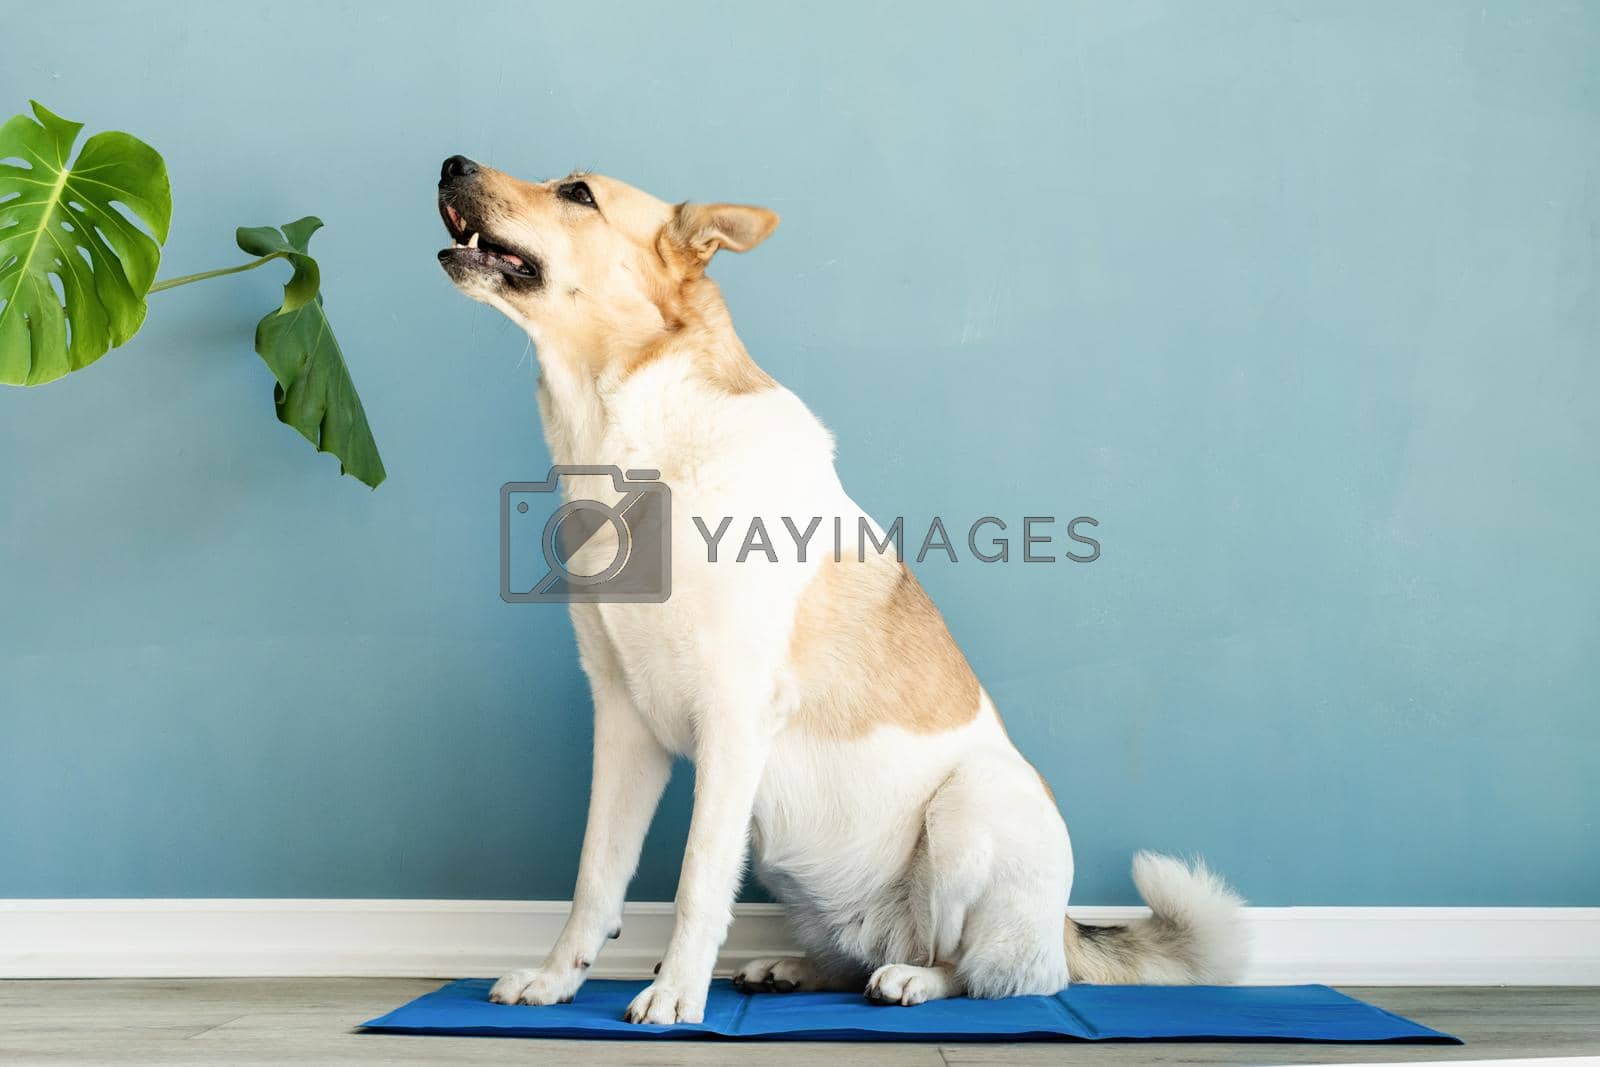 Royalty free image of Cute mixed breed dog sitting on cool mat looking up on blue wall background by Desperada